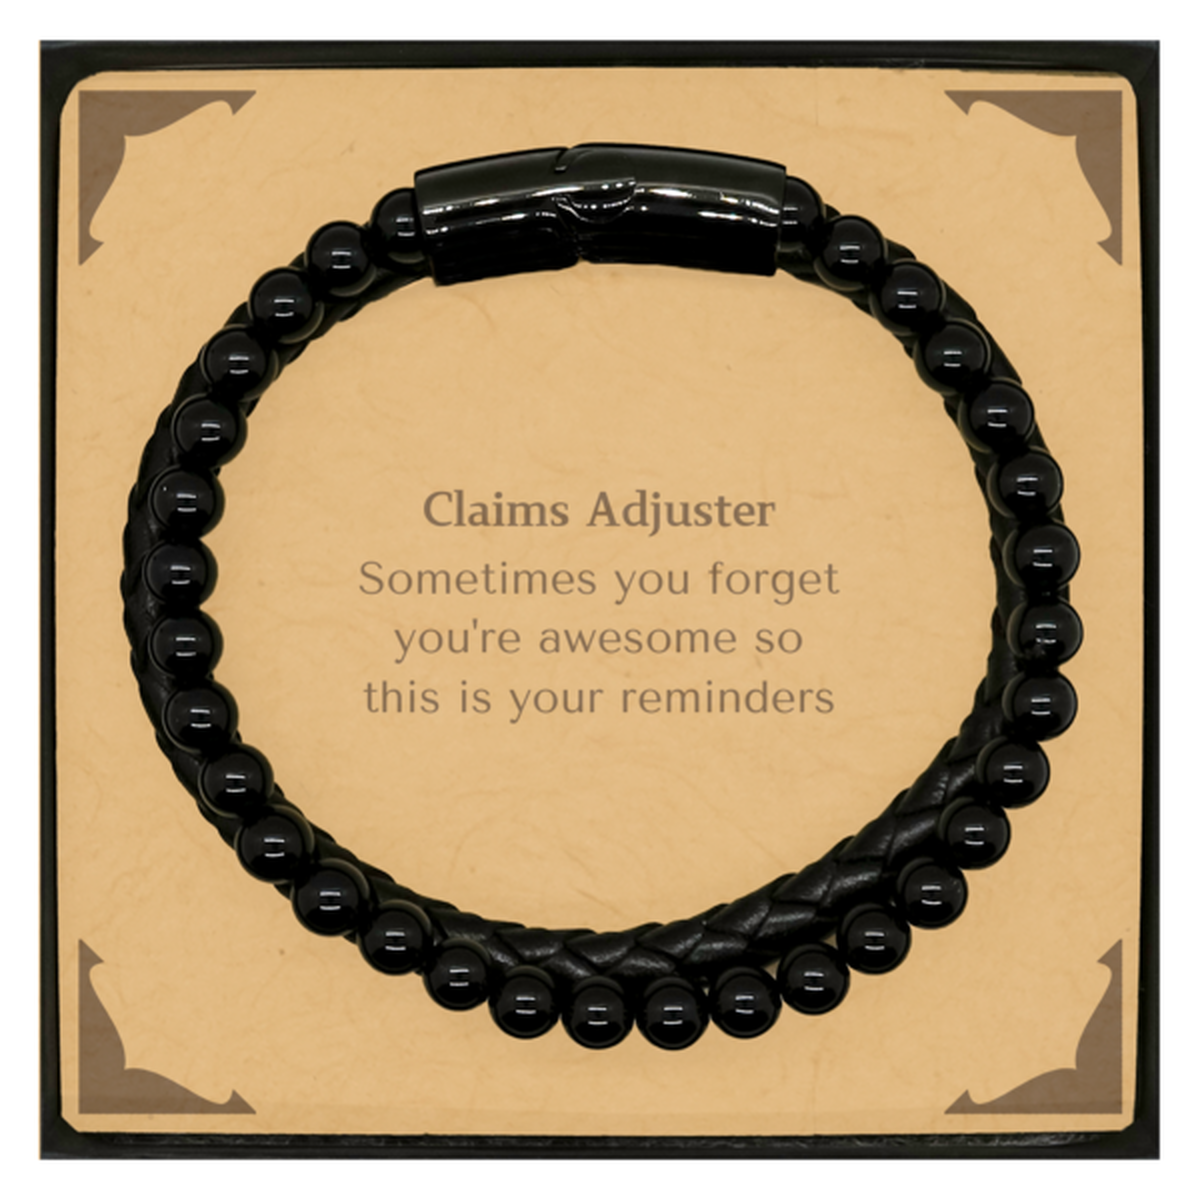 Sentimental Claims Adjuster Stone Leather Bracelets, Claims Adjuster Sometimes you forget you're awesome so this is your reminders, Graduation Christmas Birthday Gifts for Claims Adjuster, Men, Women, Coworkers